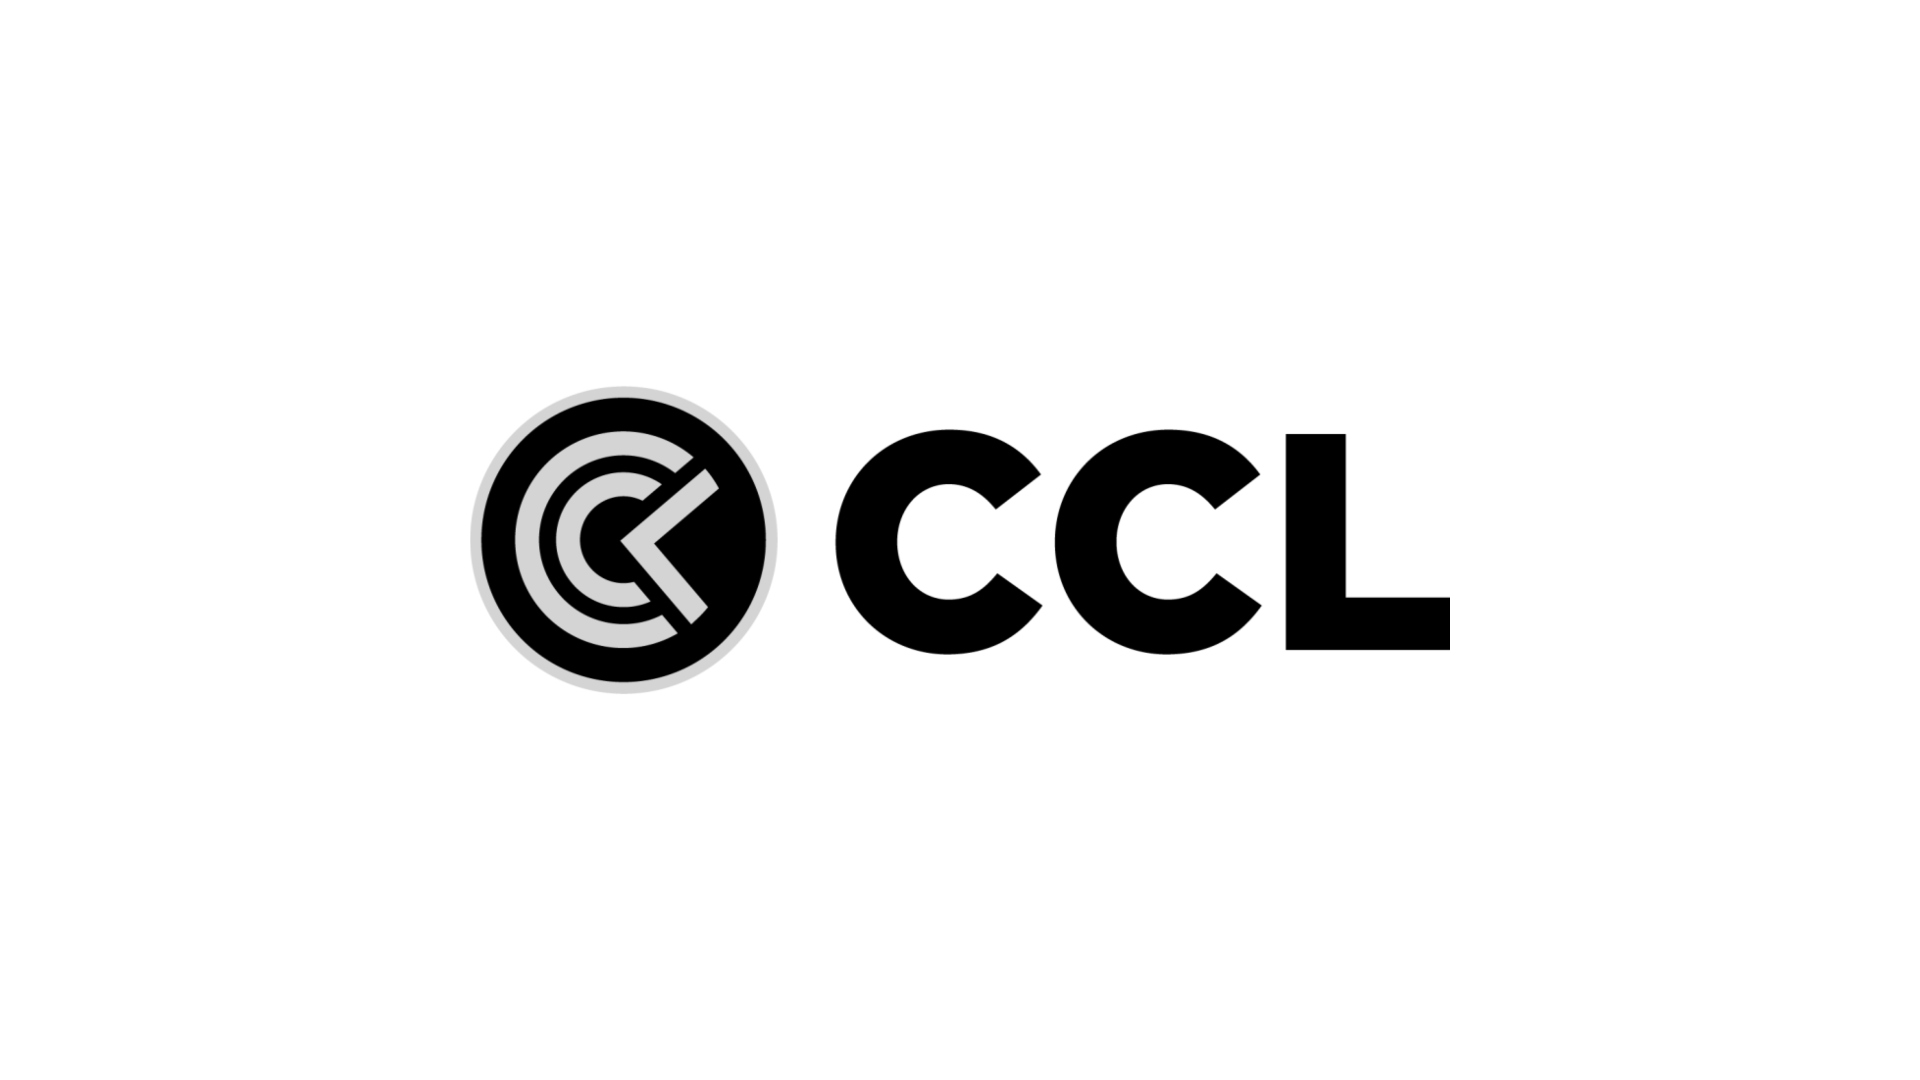 Best website for custom PC builds: CCL. Image shows the company logo.